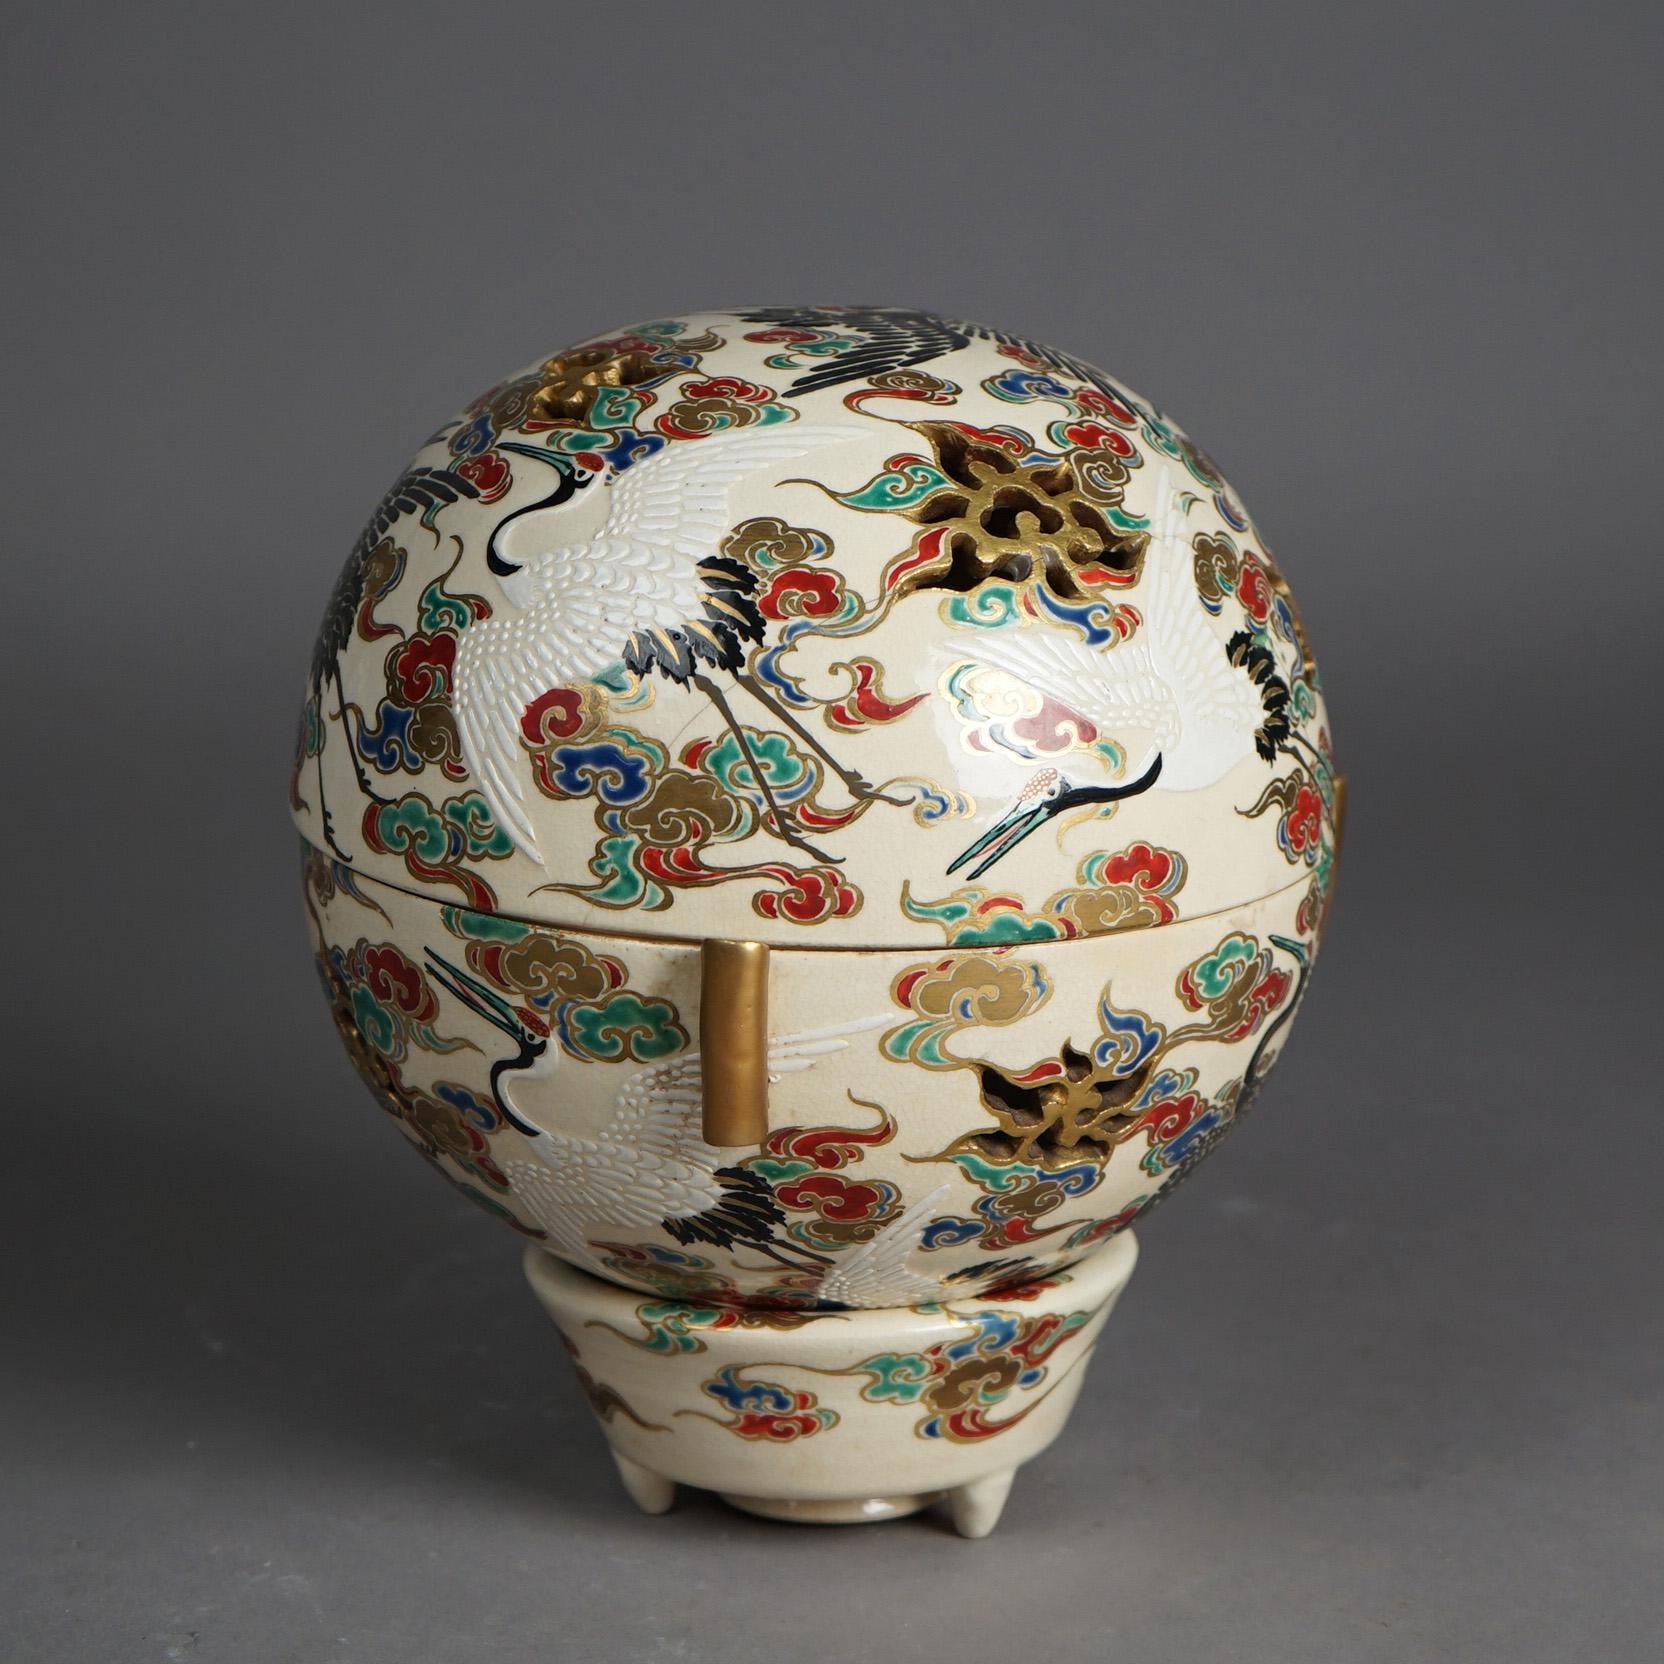 An antique Japanese Satsuma Meiji footed censer offers porcelain construction in globe form with hand painted and gilt all-over garden scene having heron and floral elements, c1910

Measures - 9 1/2